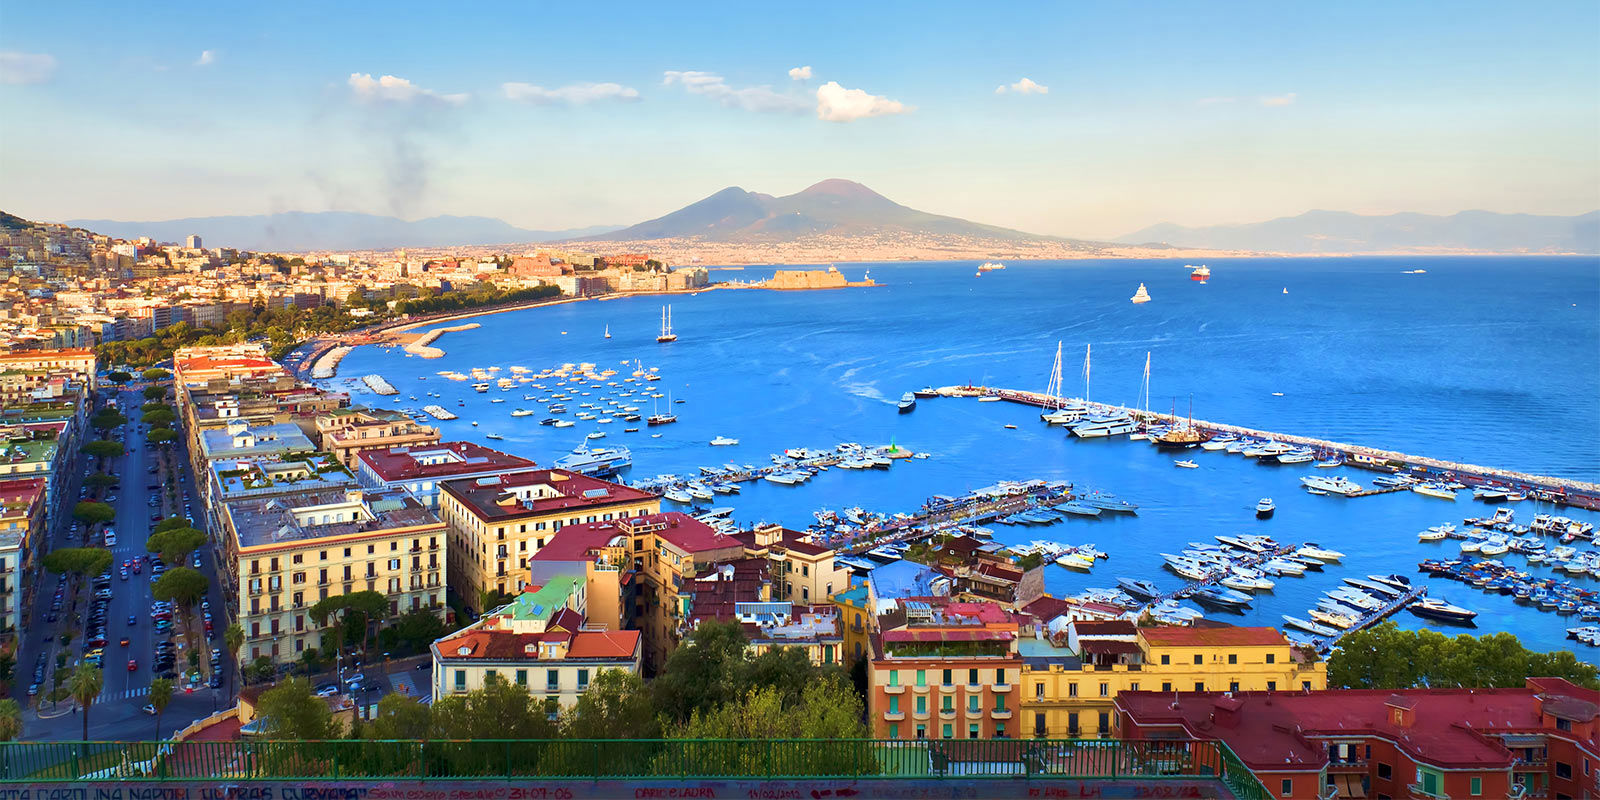 LHP Suite Napoli - Holiday Apartments in Chiaia, Naples 4